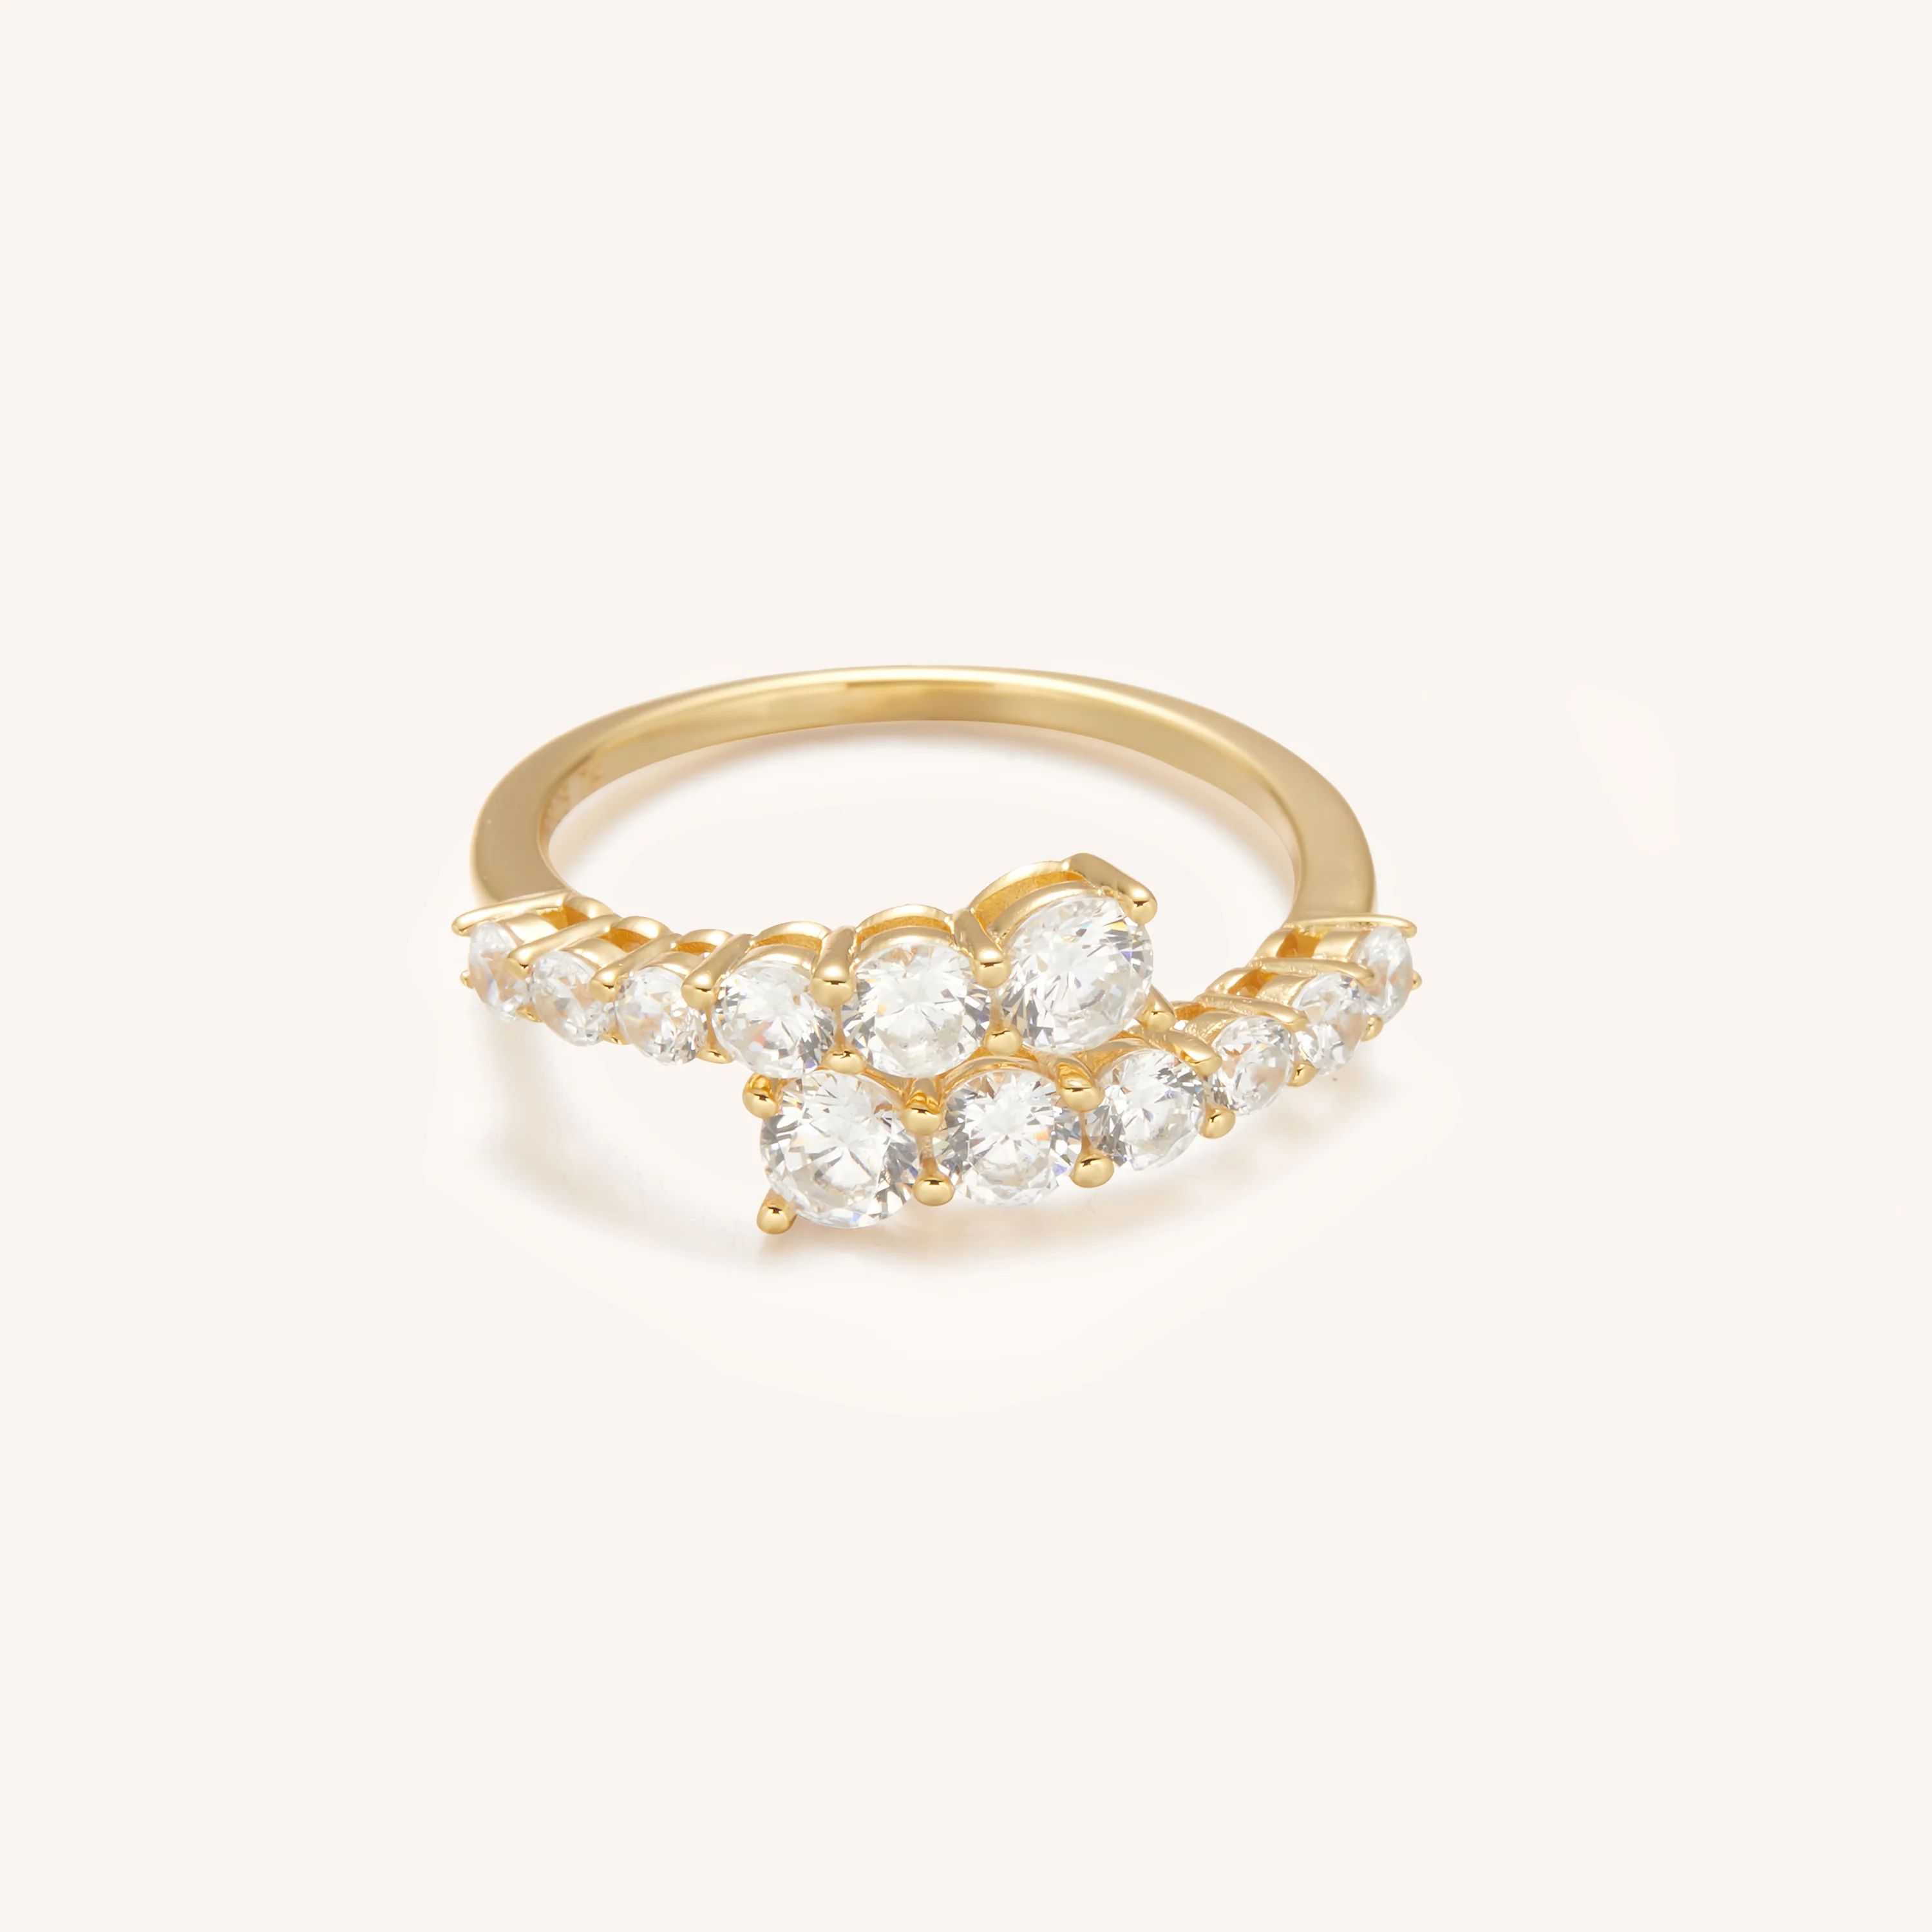 Adelaide Crystal Gold Vermeil Ring | Victoria Emerson